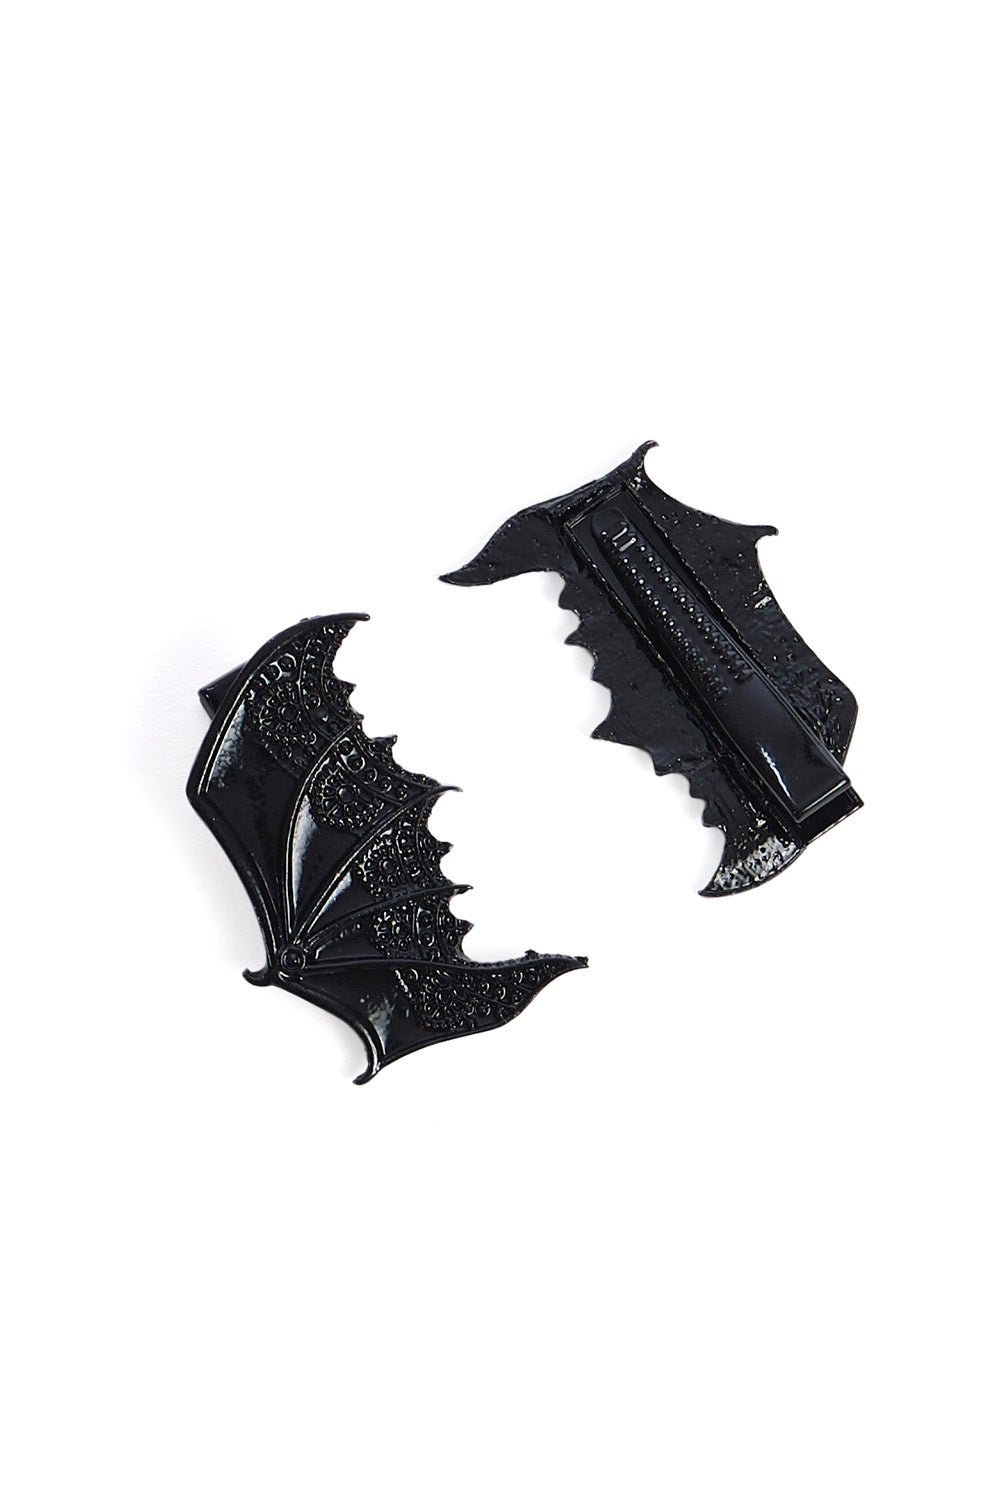 Banned Bat Wing Hair Clips - Kate's Clothing